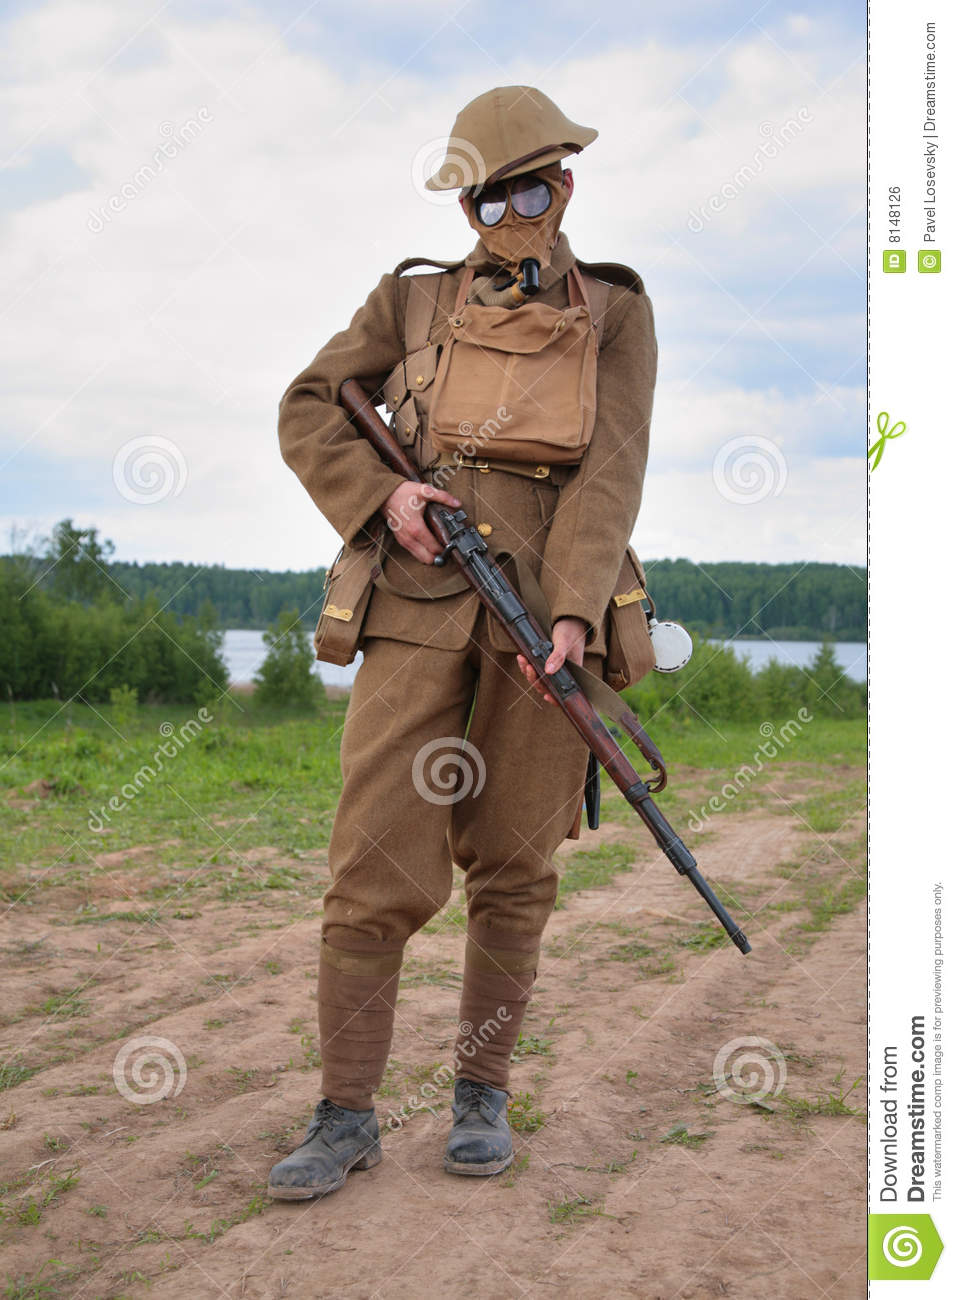 Royalty Free Stock Image  Soldier Of Ww1 In A Gas Mask